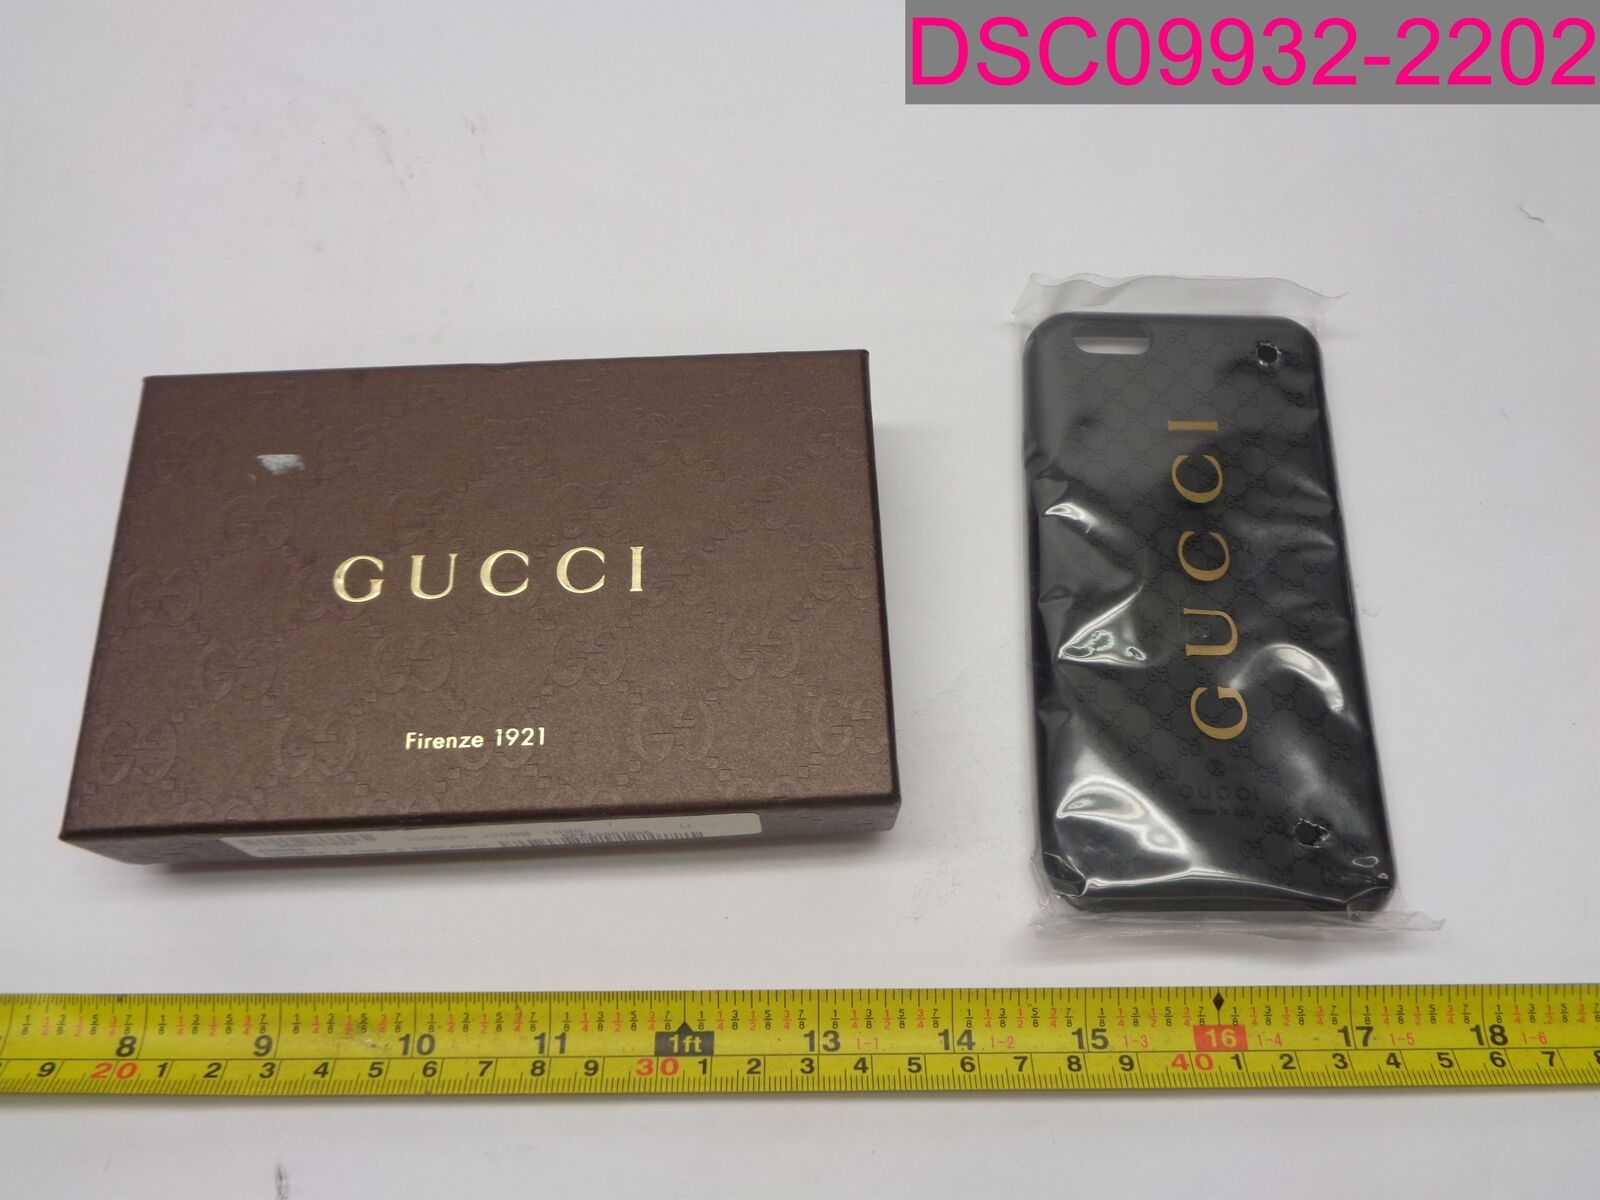 Gucci Iphone 5 Wallpapers